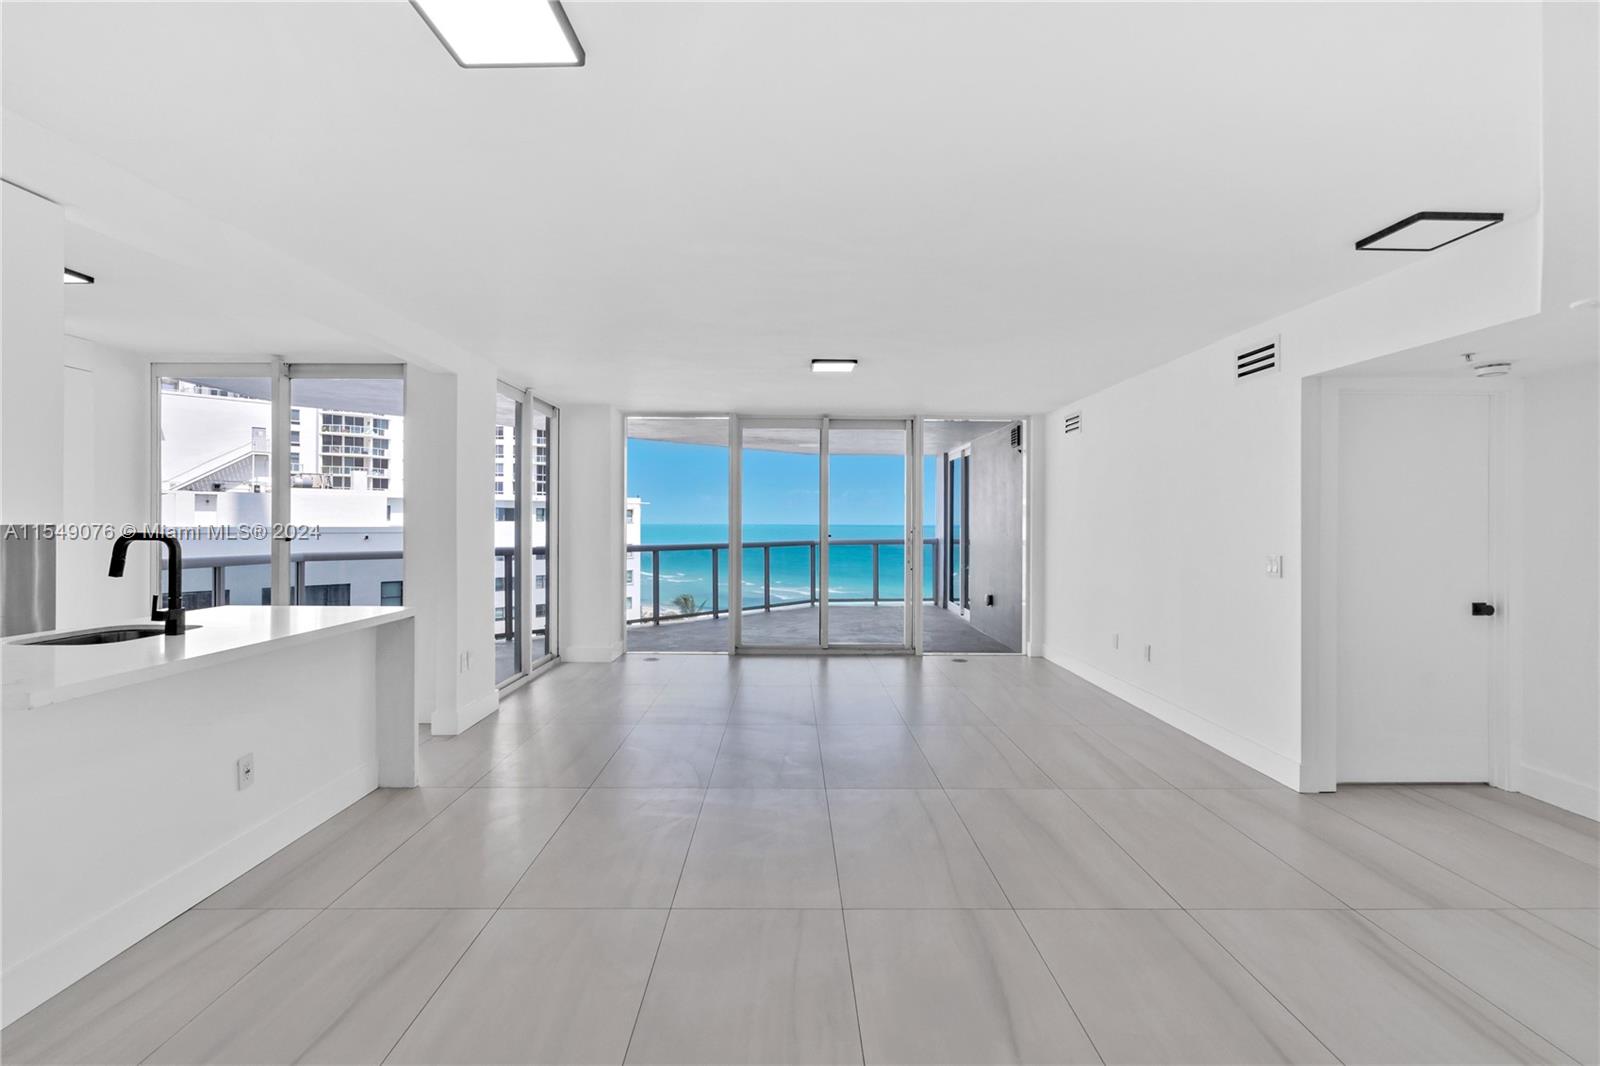 Embrace the epitome of coastal living with this immaculate 2-bedroom, 2-bathroom condo in the heart of Miami Beach. Impeccably renovated from top to bottom, everything is new, including appliances and AC.  It offers a bright and airy ambiance that perfectly complements the stunning beachfront views. Start your mornings with sunrise yoga sessions on the pristine sands, or opt for a
leisurely walk or bike ride along the boardwalk right at your doorstep. Located in Mid-Miami Beach, you're close to everything the city has to offer, from world-class dining to nightlife in an easy-going residential neighborhood. With beach service daily, and a concierge 24 hrs, every day feels like a vacation in this new condo.  All Special assessments are paid by the seller.  1 garage and 1
storage unit.